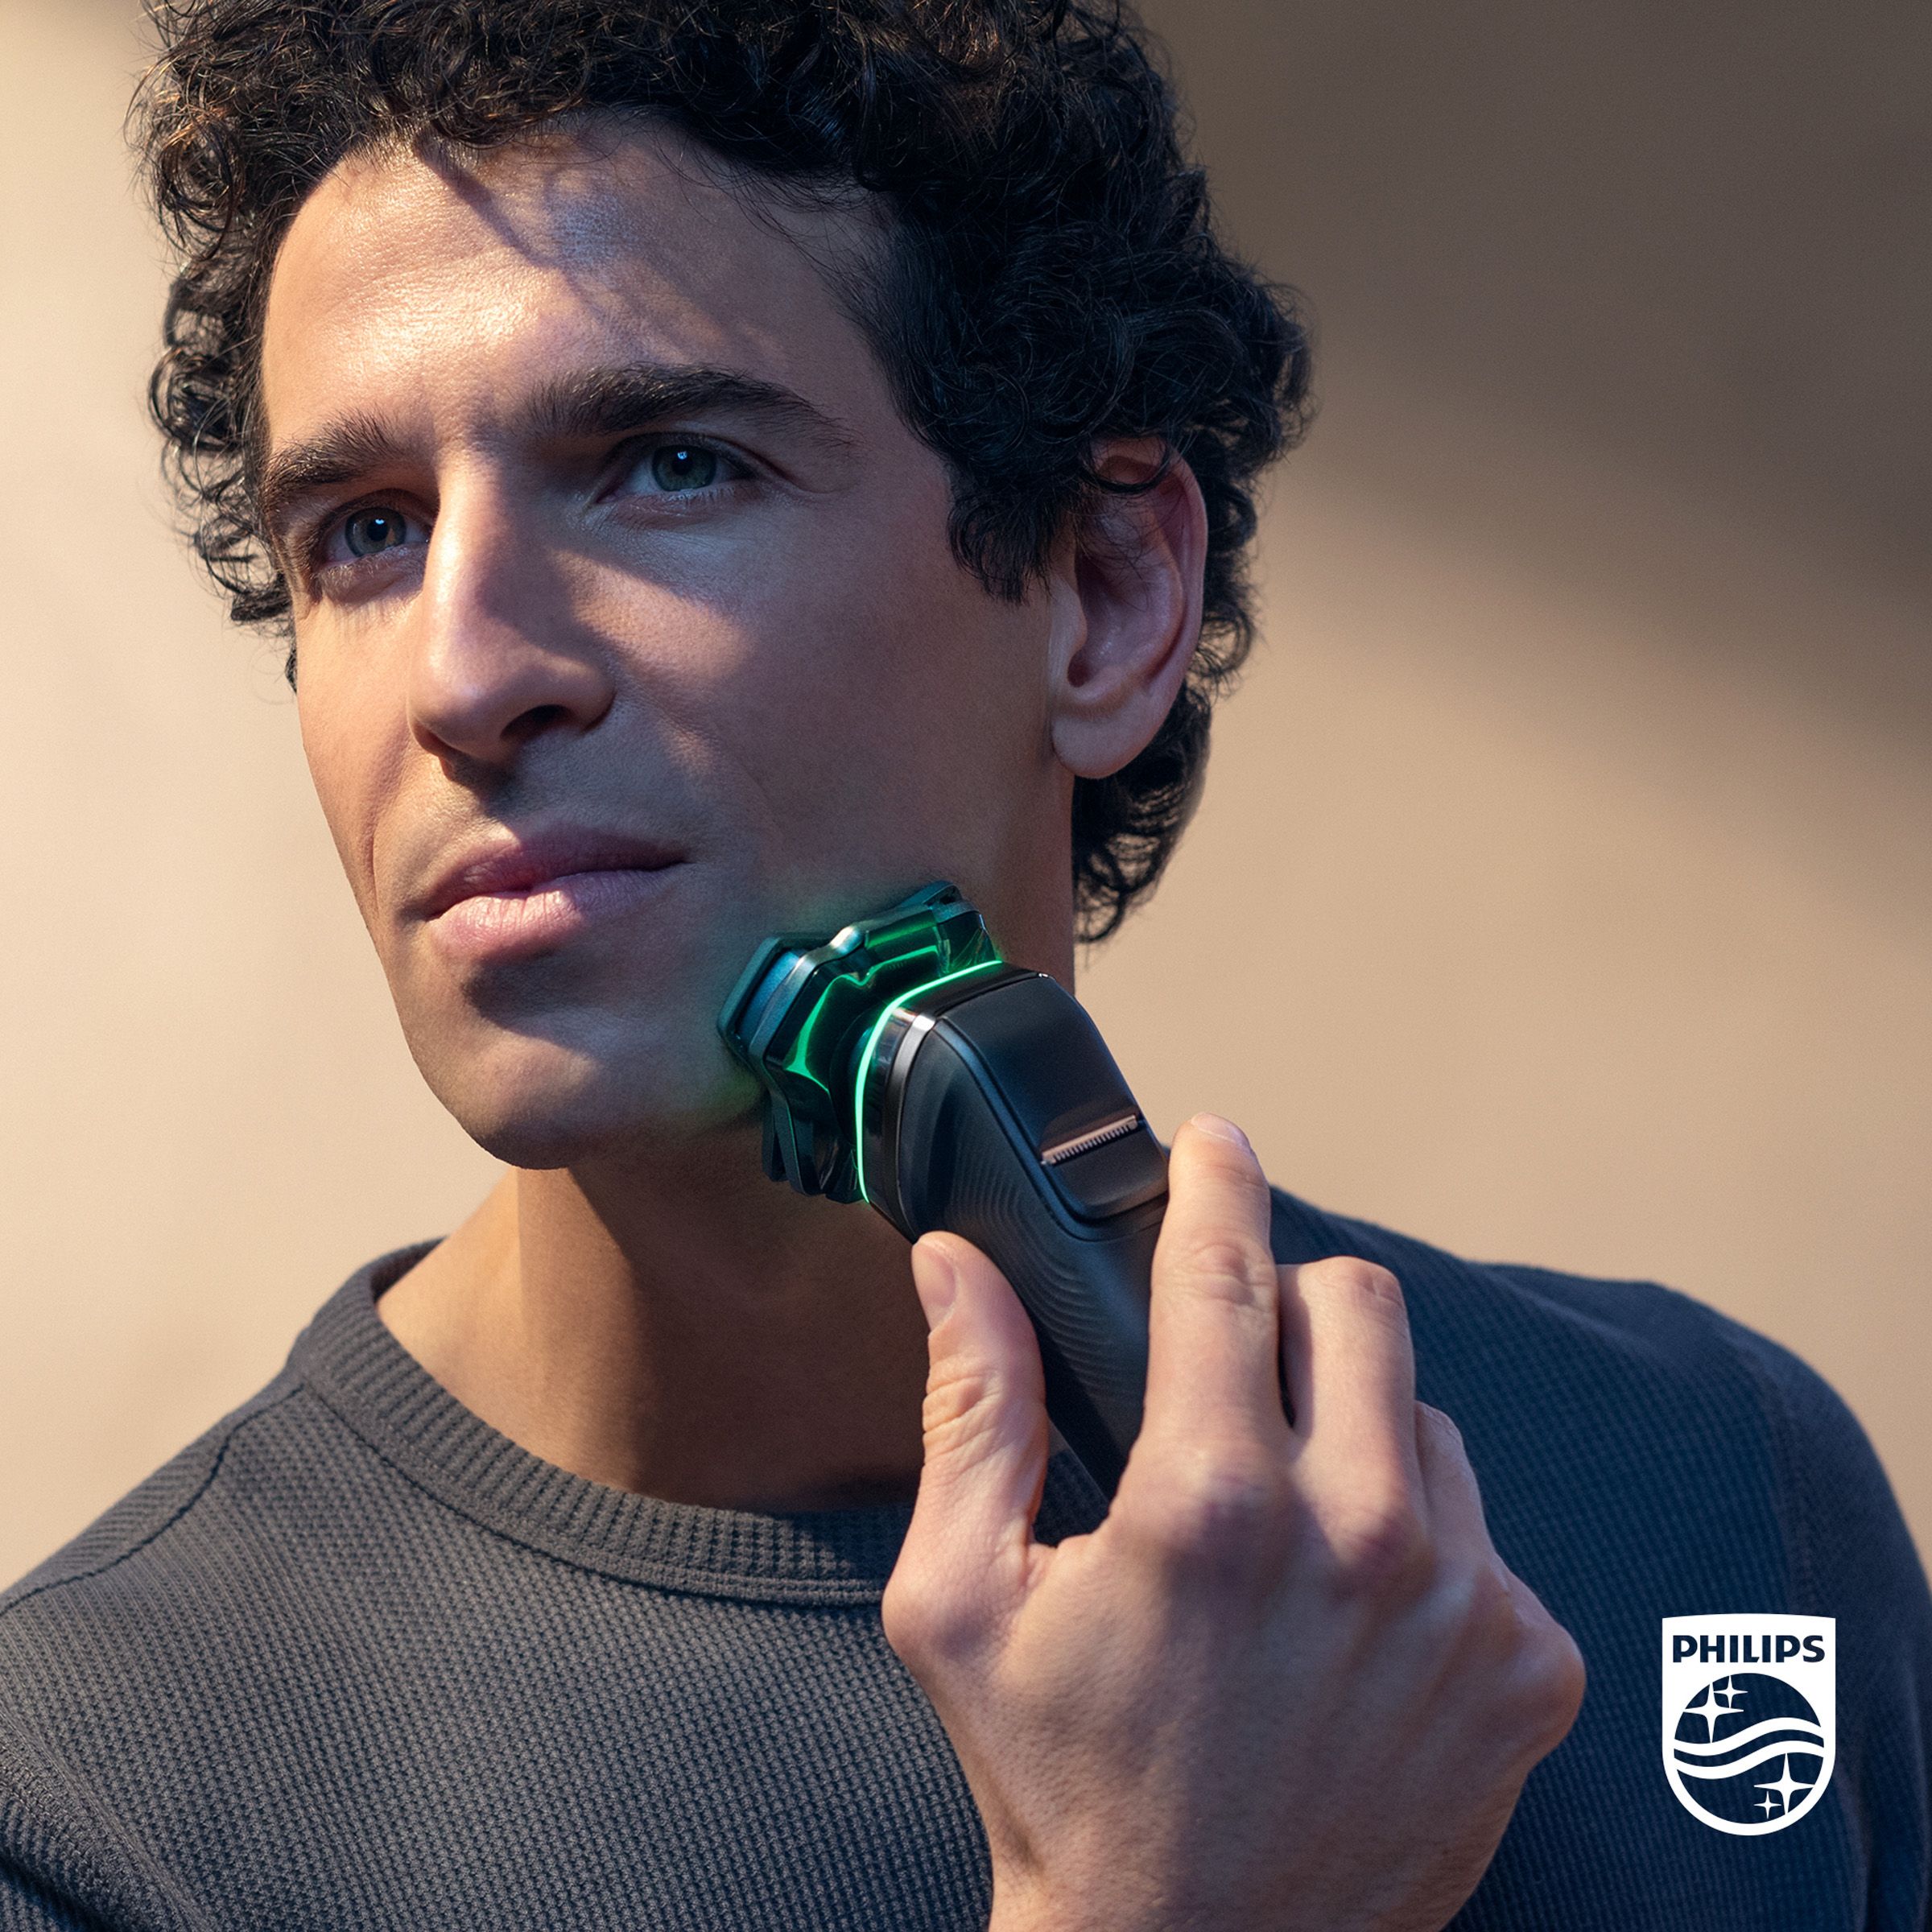 Discover great offer’s on Philips shaving, from the world’s #1 electric shaving brand